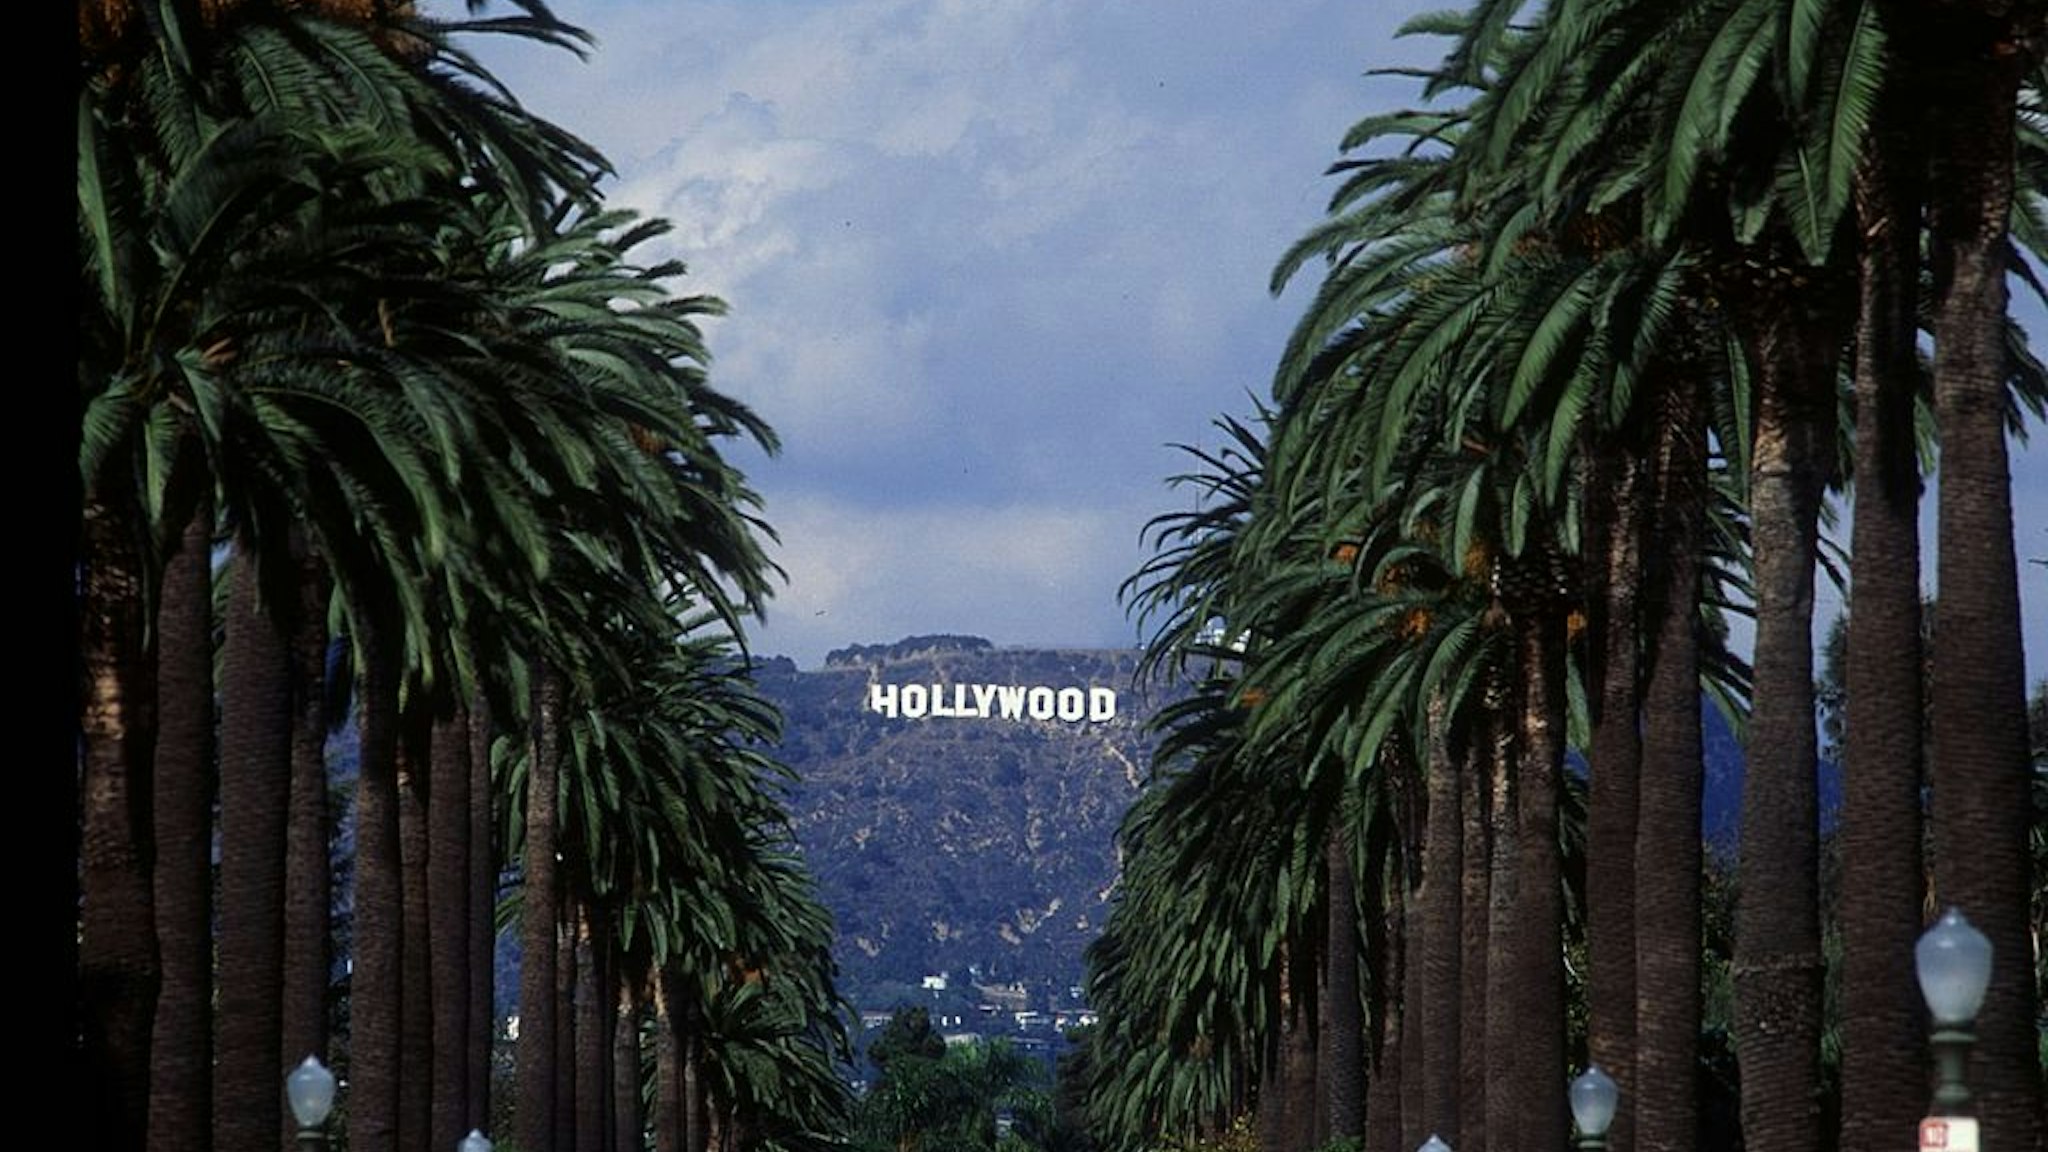 29TH OCT 93: A GENERAL VIEW OF THE FAMOUS HOLLYWOOD SIGN IN LOS ANGELES. L.A. IS ONE OF THE SITES FOR THE 1994 WORLD CUP SOCCER FINALS